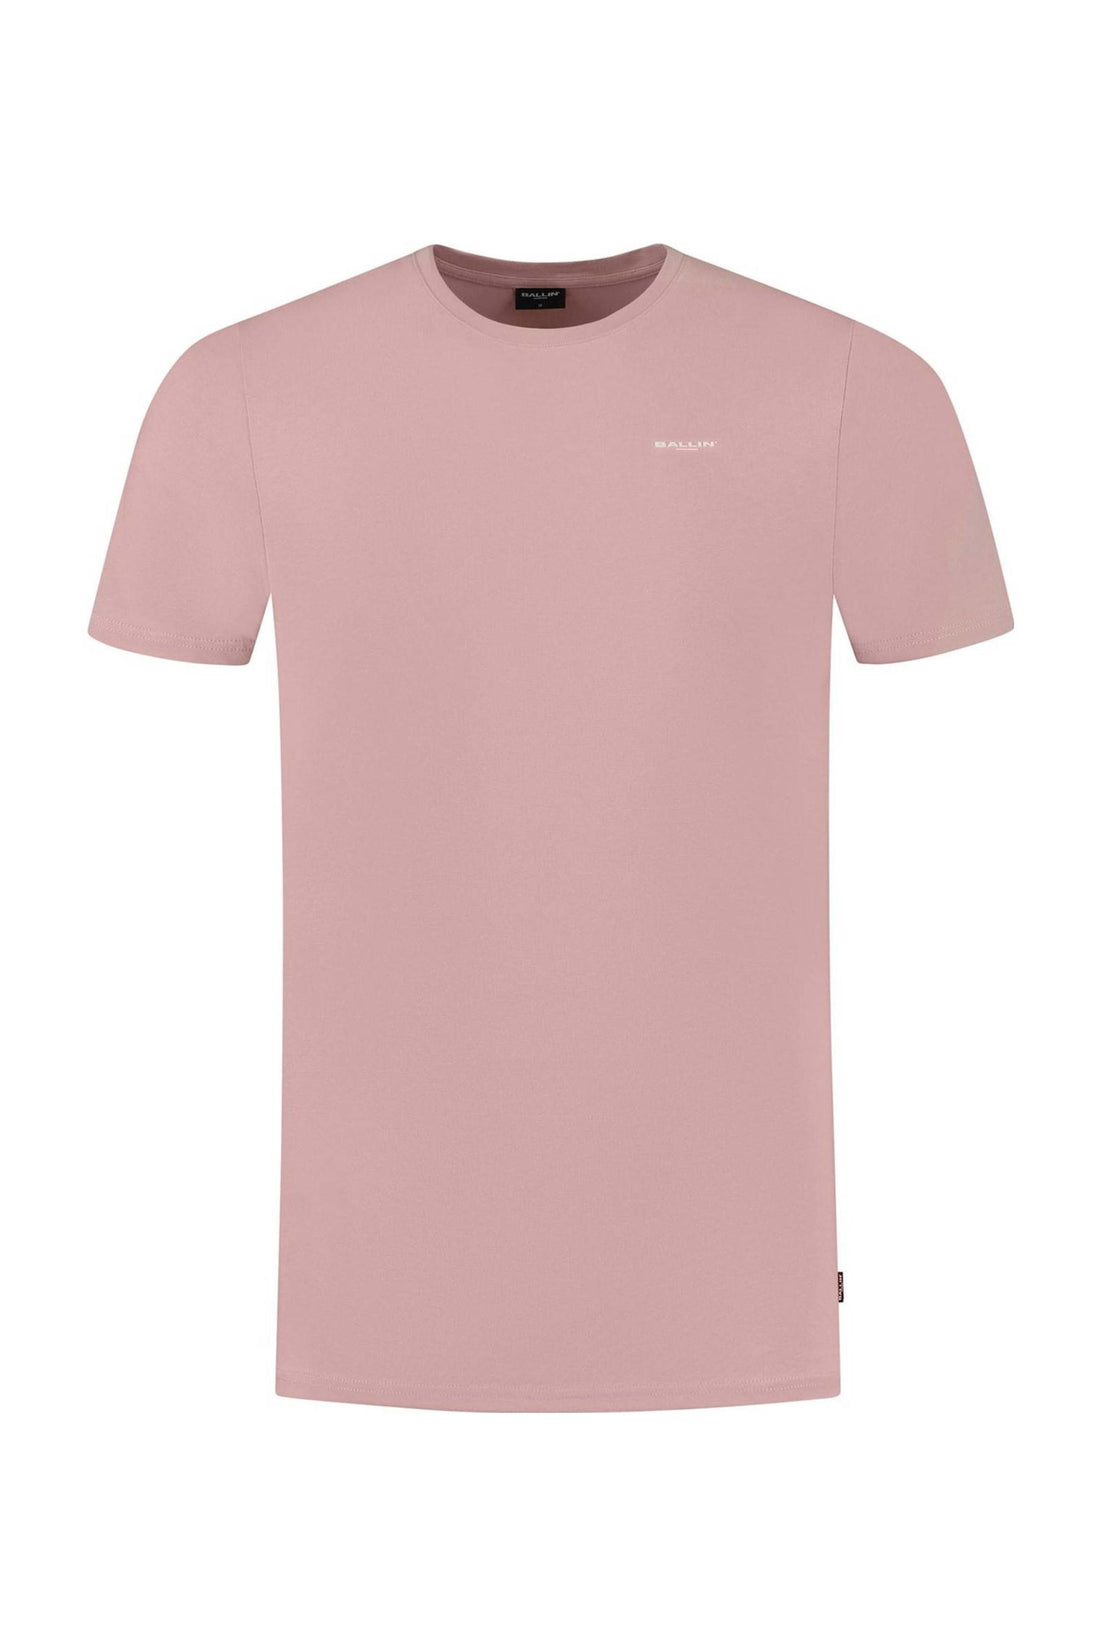 Tshirt with pocket on chest and back print - Old Pink